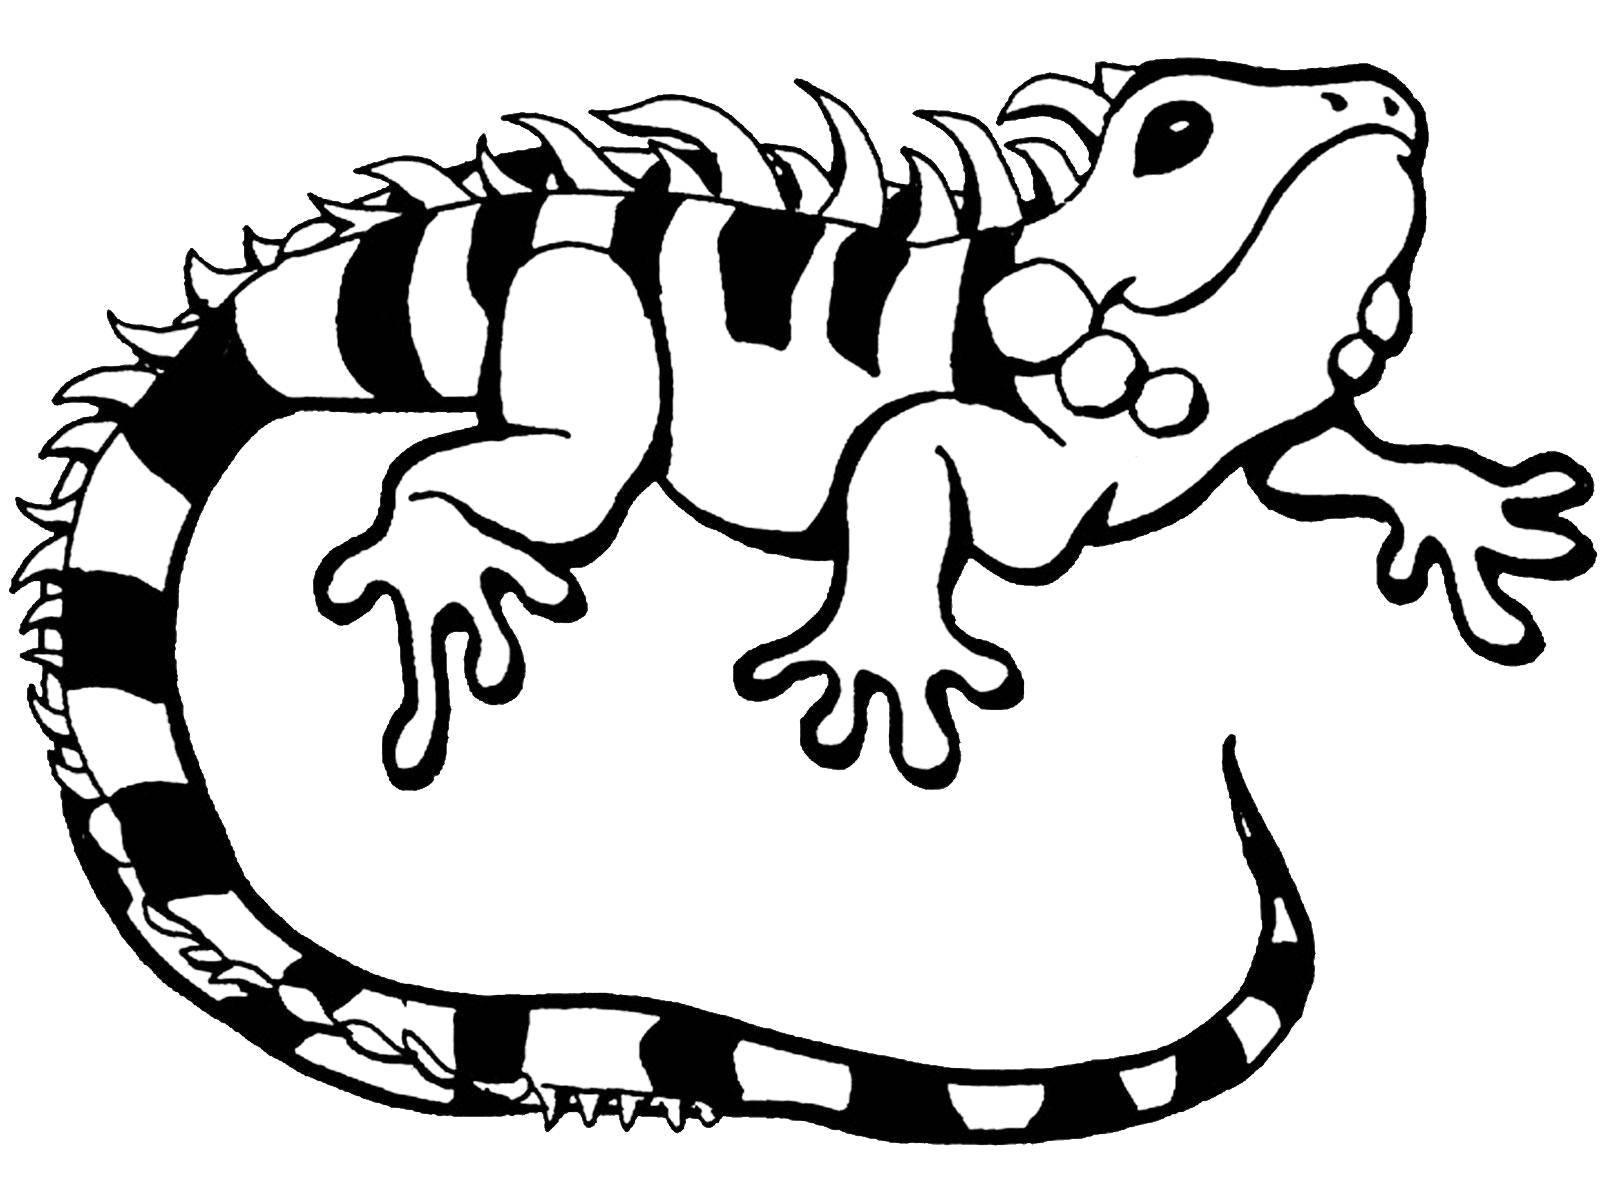 Iguana coloring pages to download and print for free